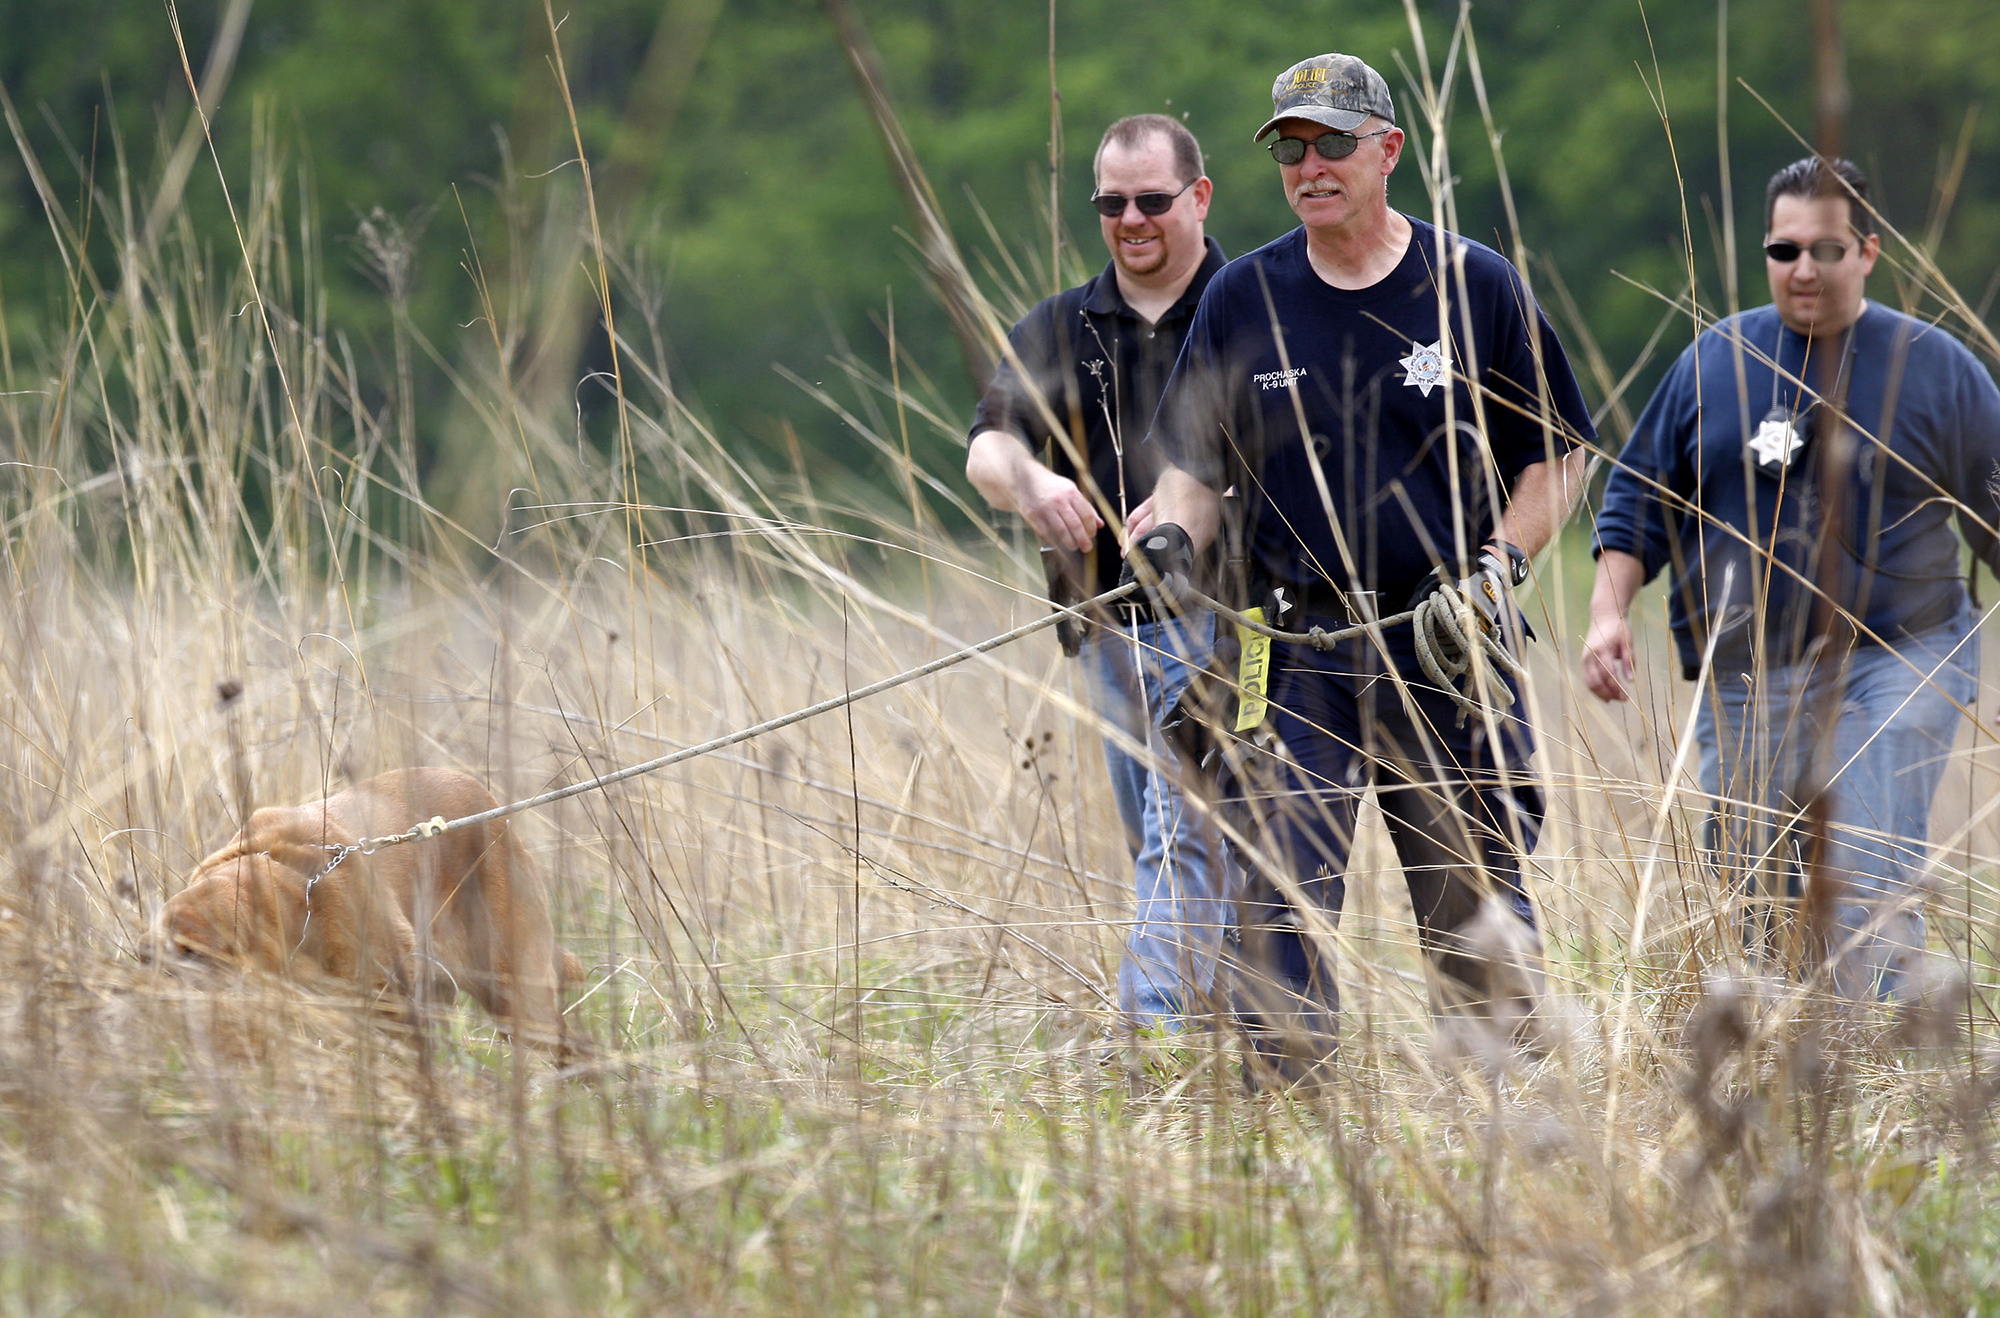 PHOTO: Joliet Police search Castle Rock State Park wetlands for evidence in Timmothy Pitzen's disappearance, May 19, 2011.